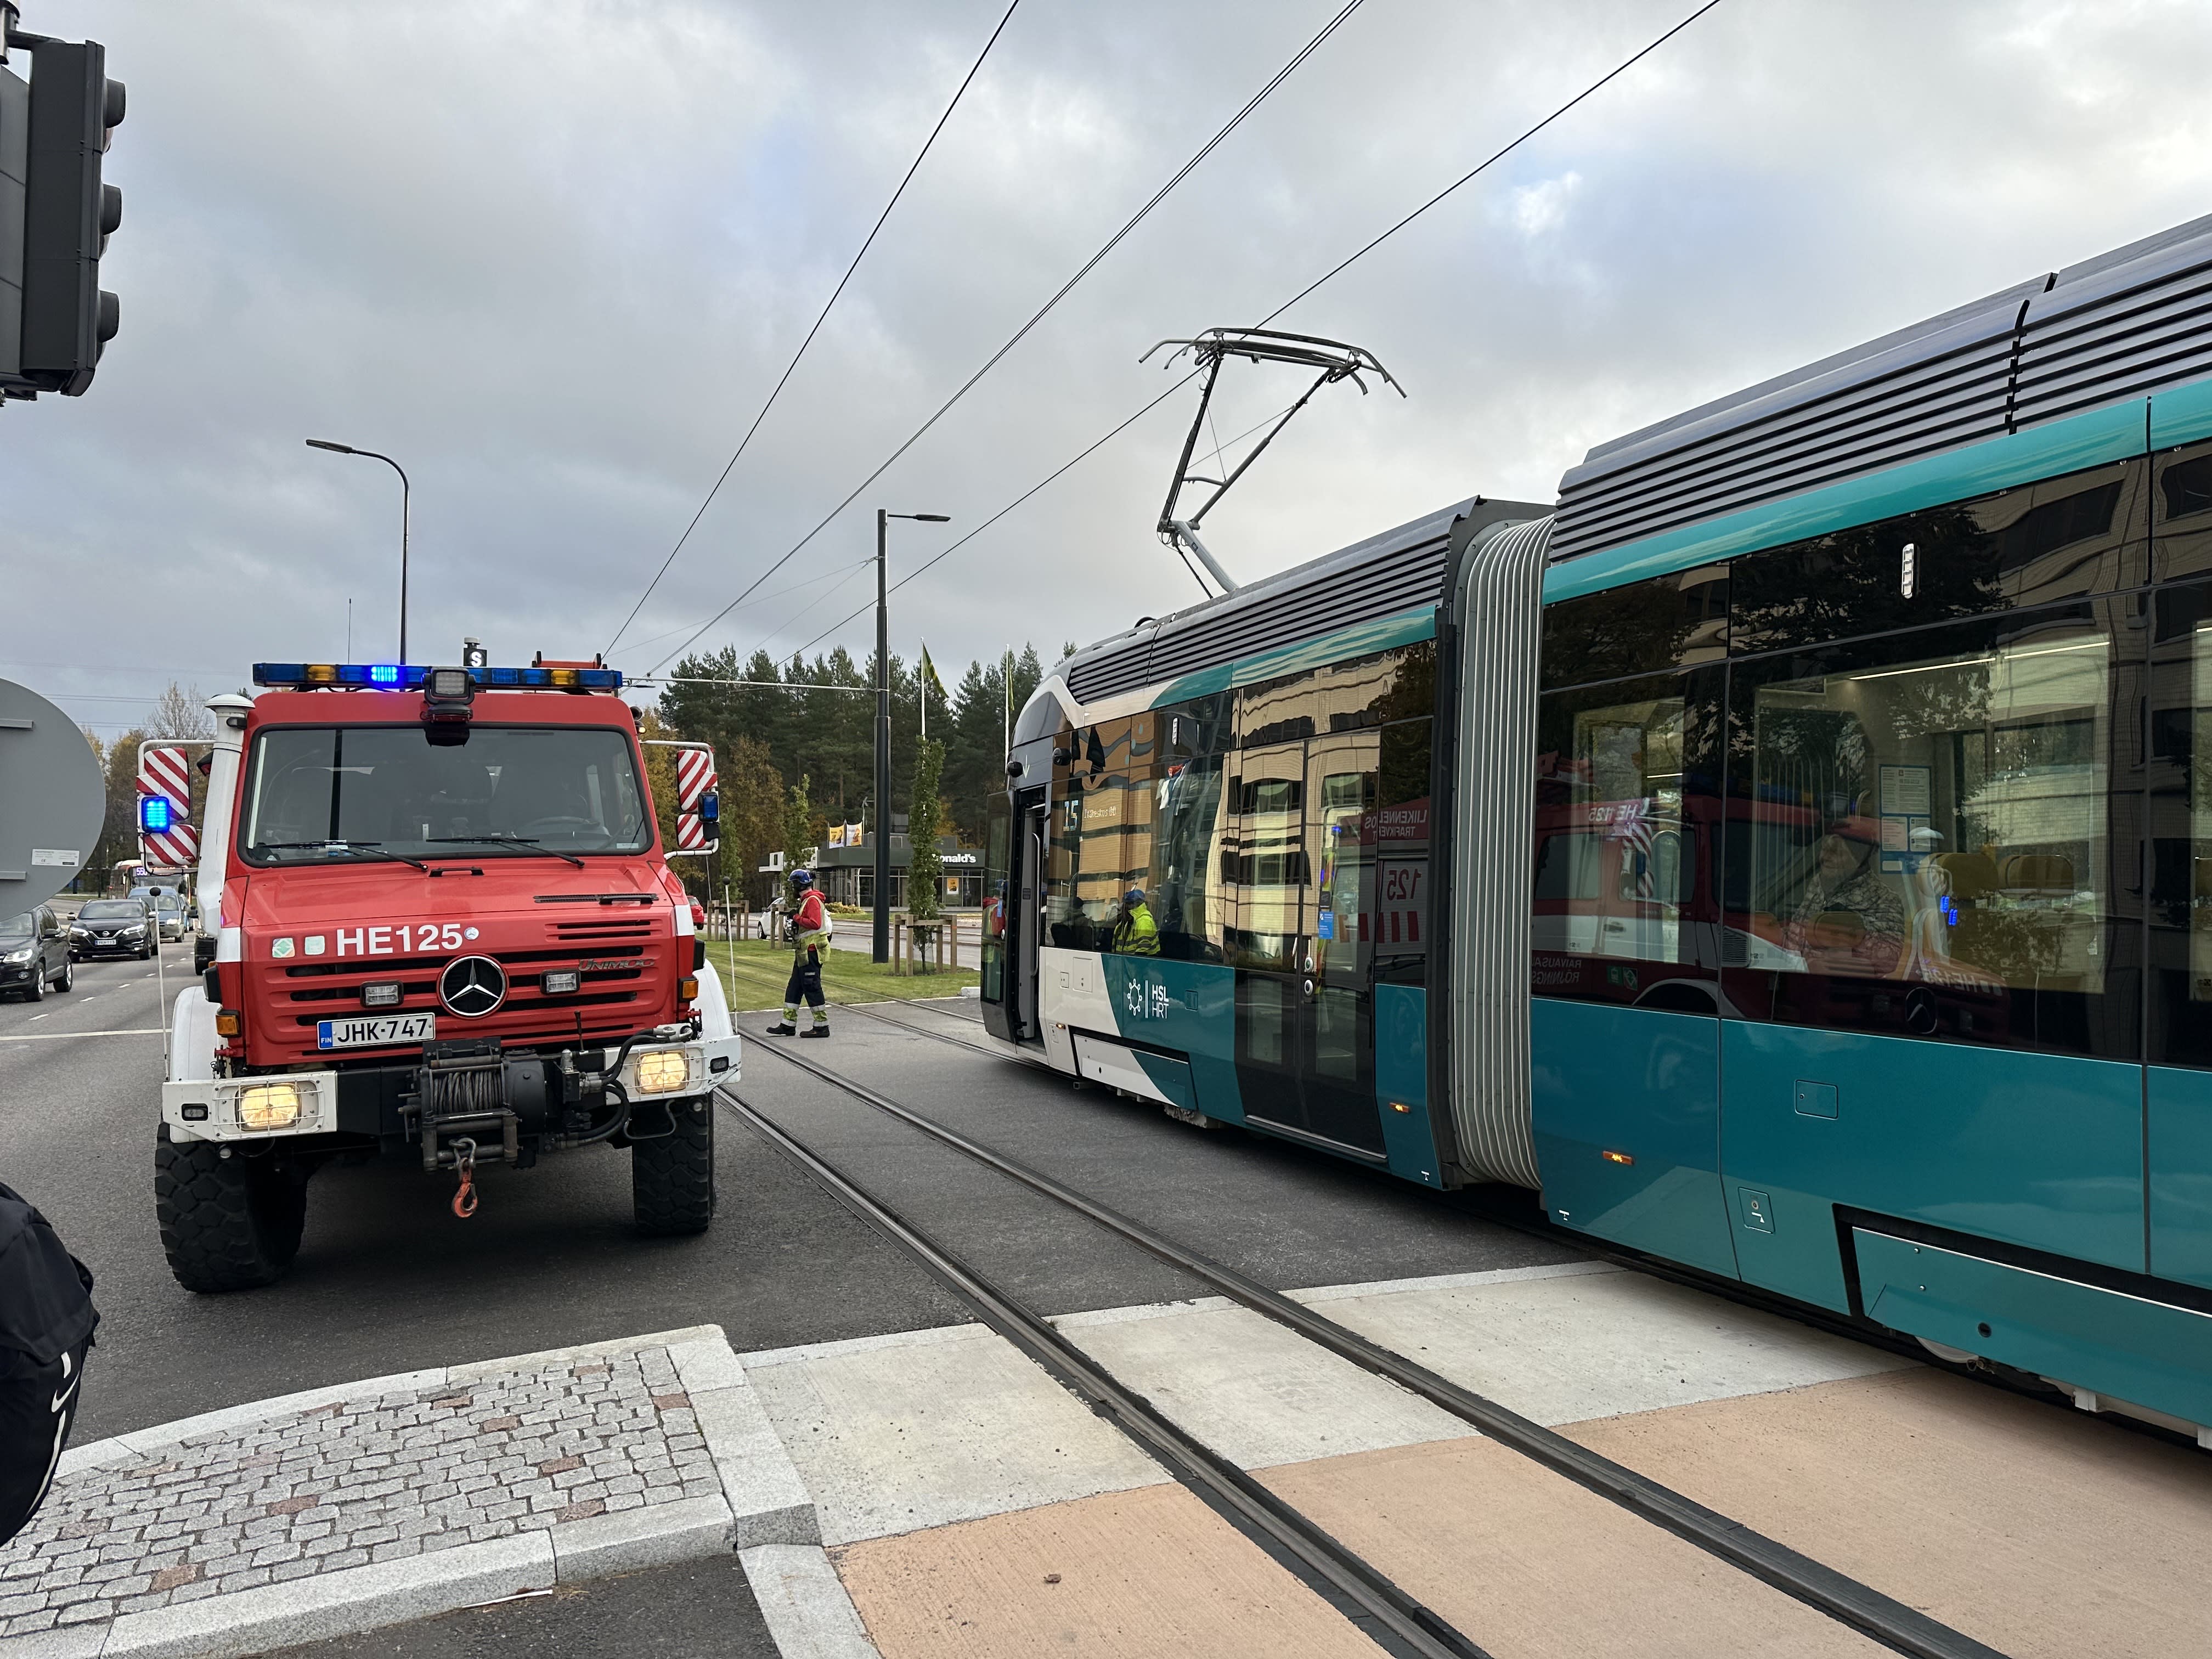 A new tram in a collision with a car, three days after the start of service